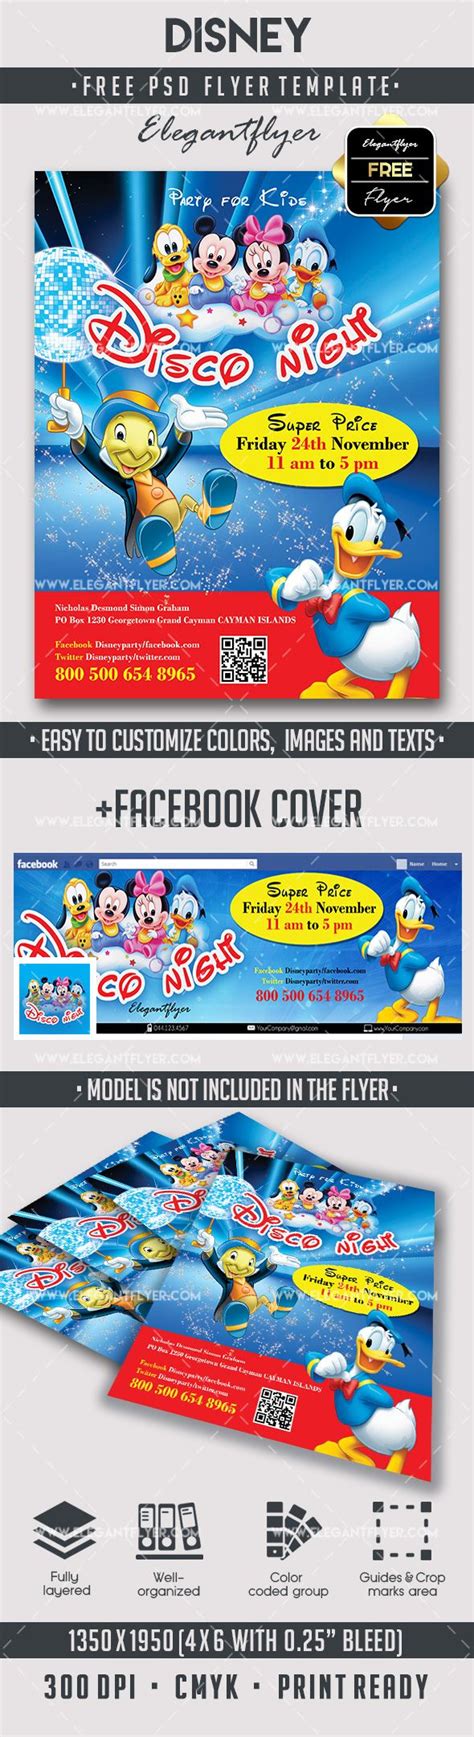 Disney Free Flyer Psd Template Facebook Cover Free Flyers